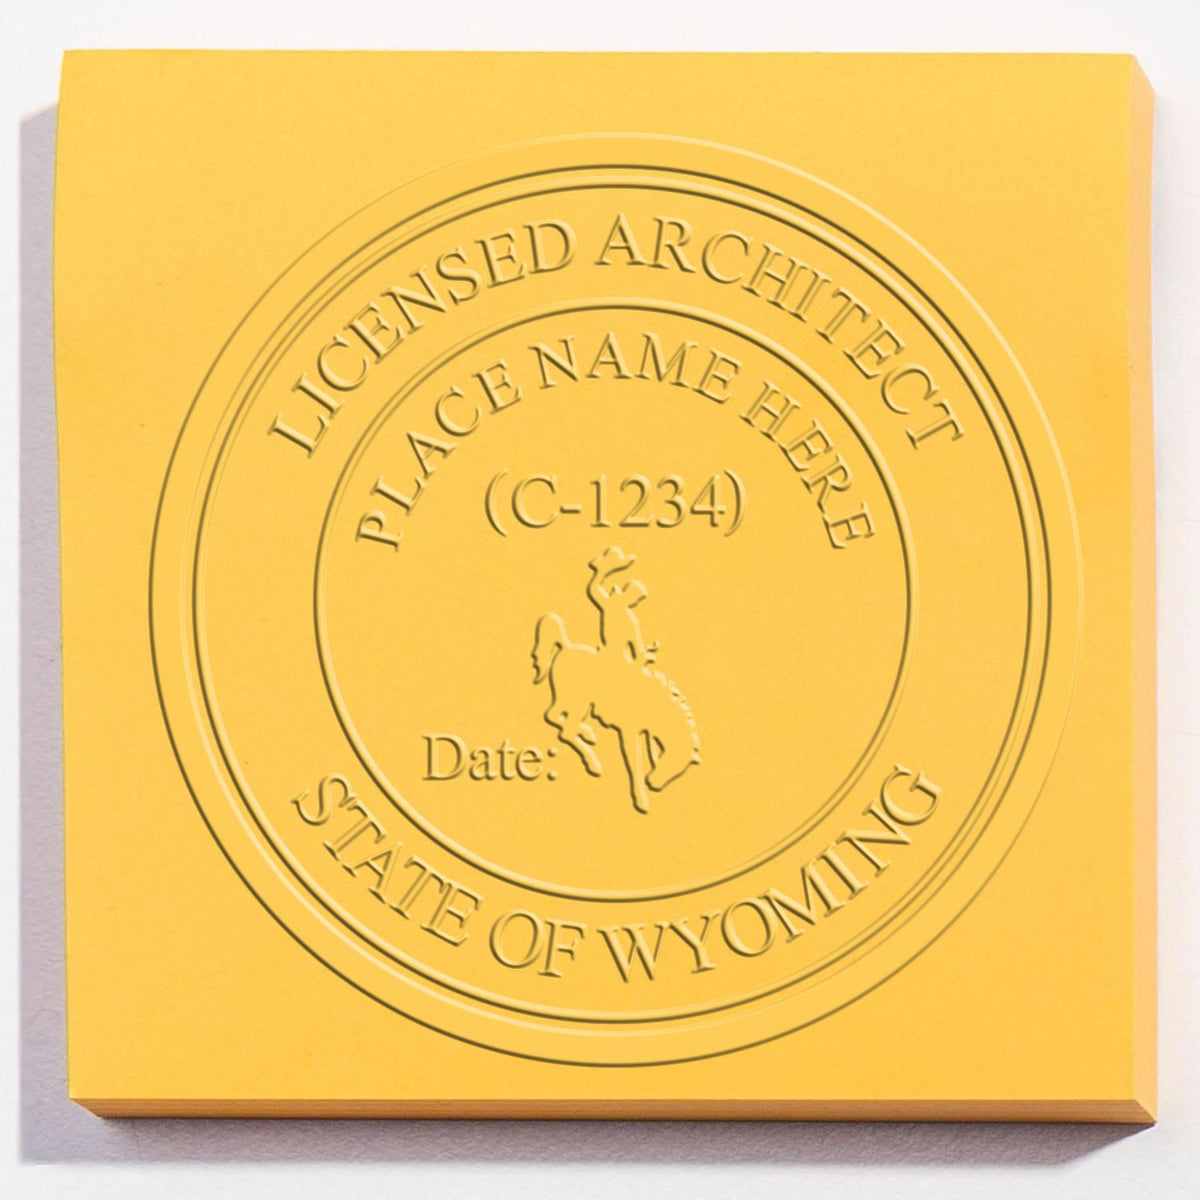 The Gift Wyoming Architect Seal stamp impression comes to life with a crisp, detailed image stamped on paper - showcasing true professional quality.